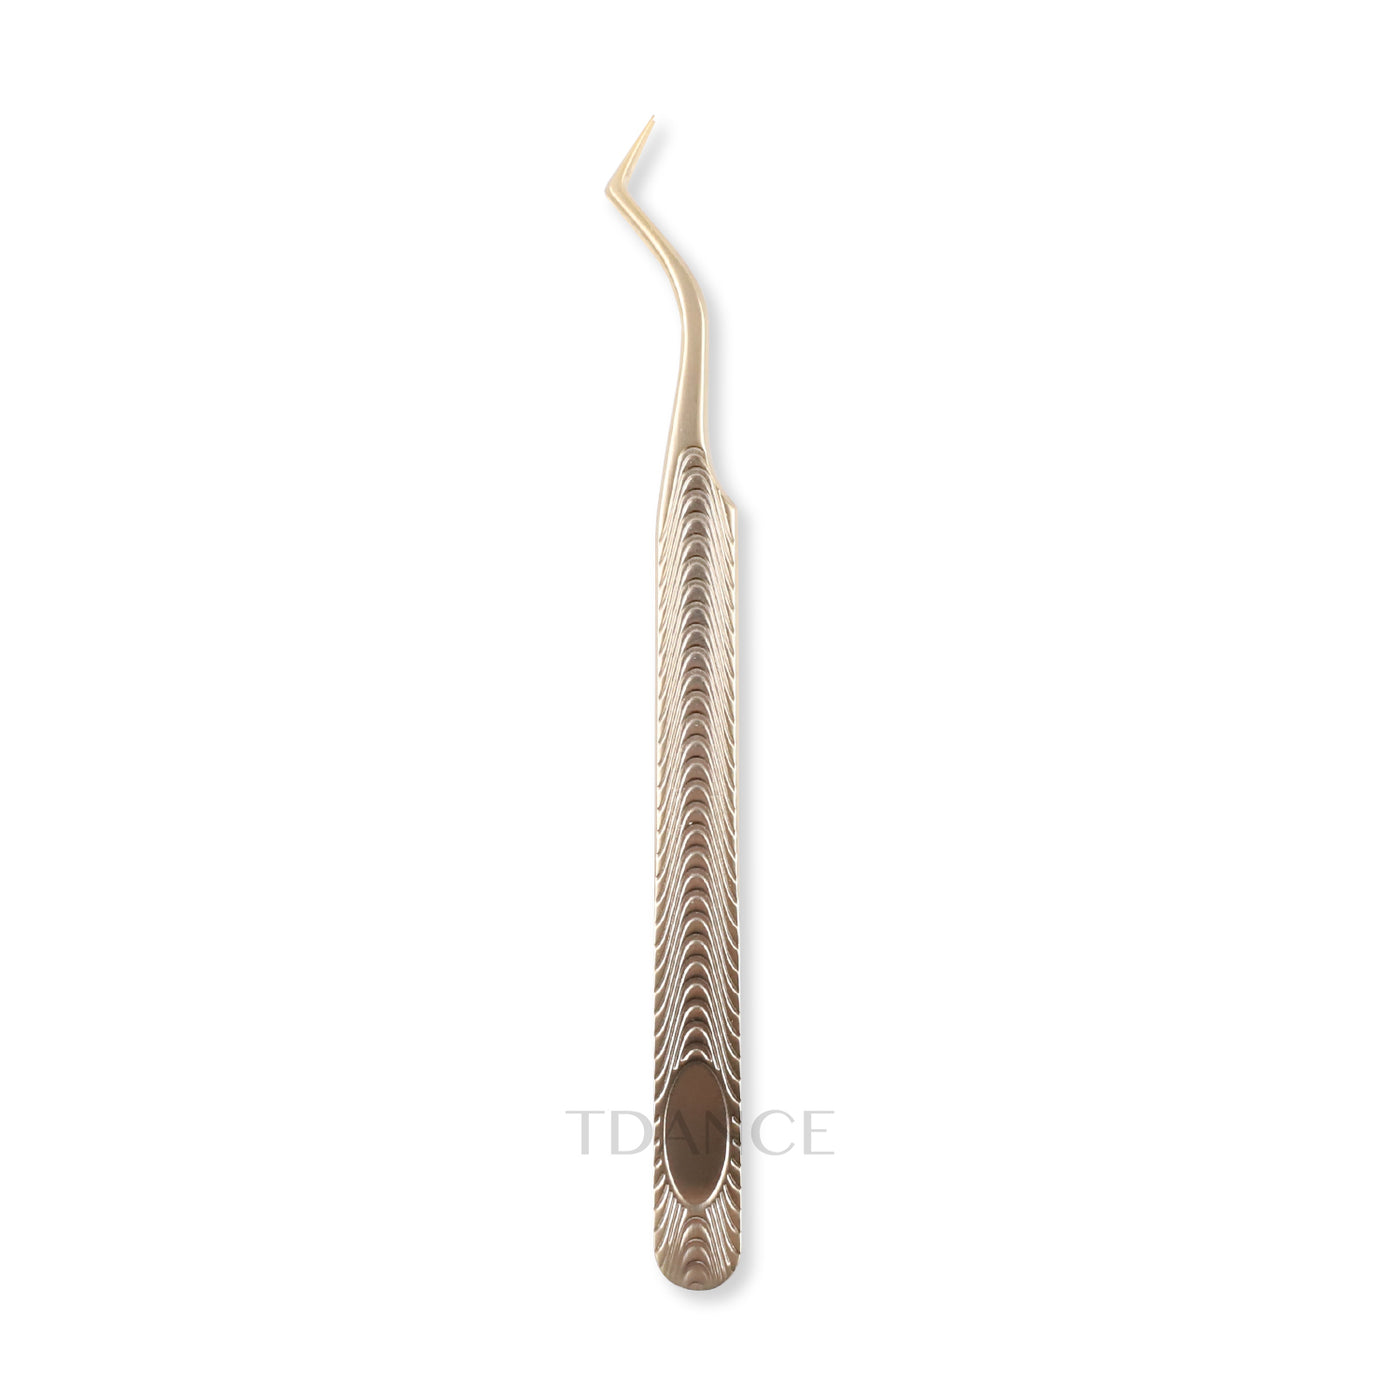 TF-03 Fish Scale Gold Tweezers For Eyelash Extension